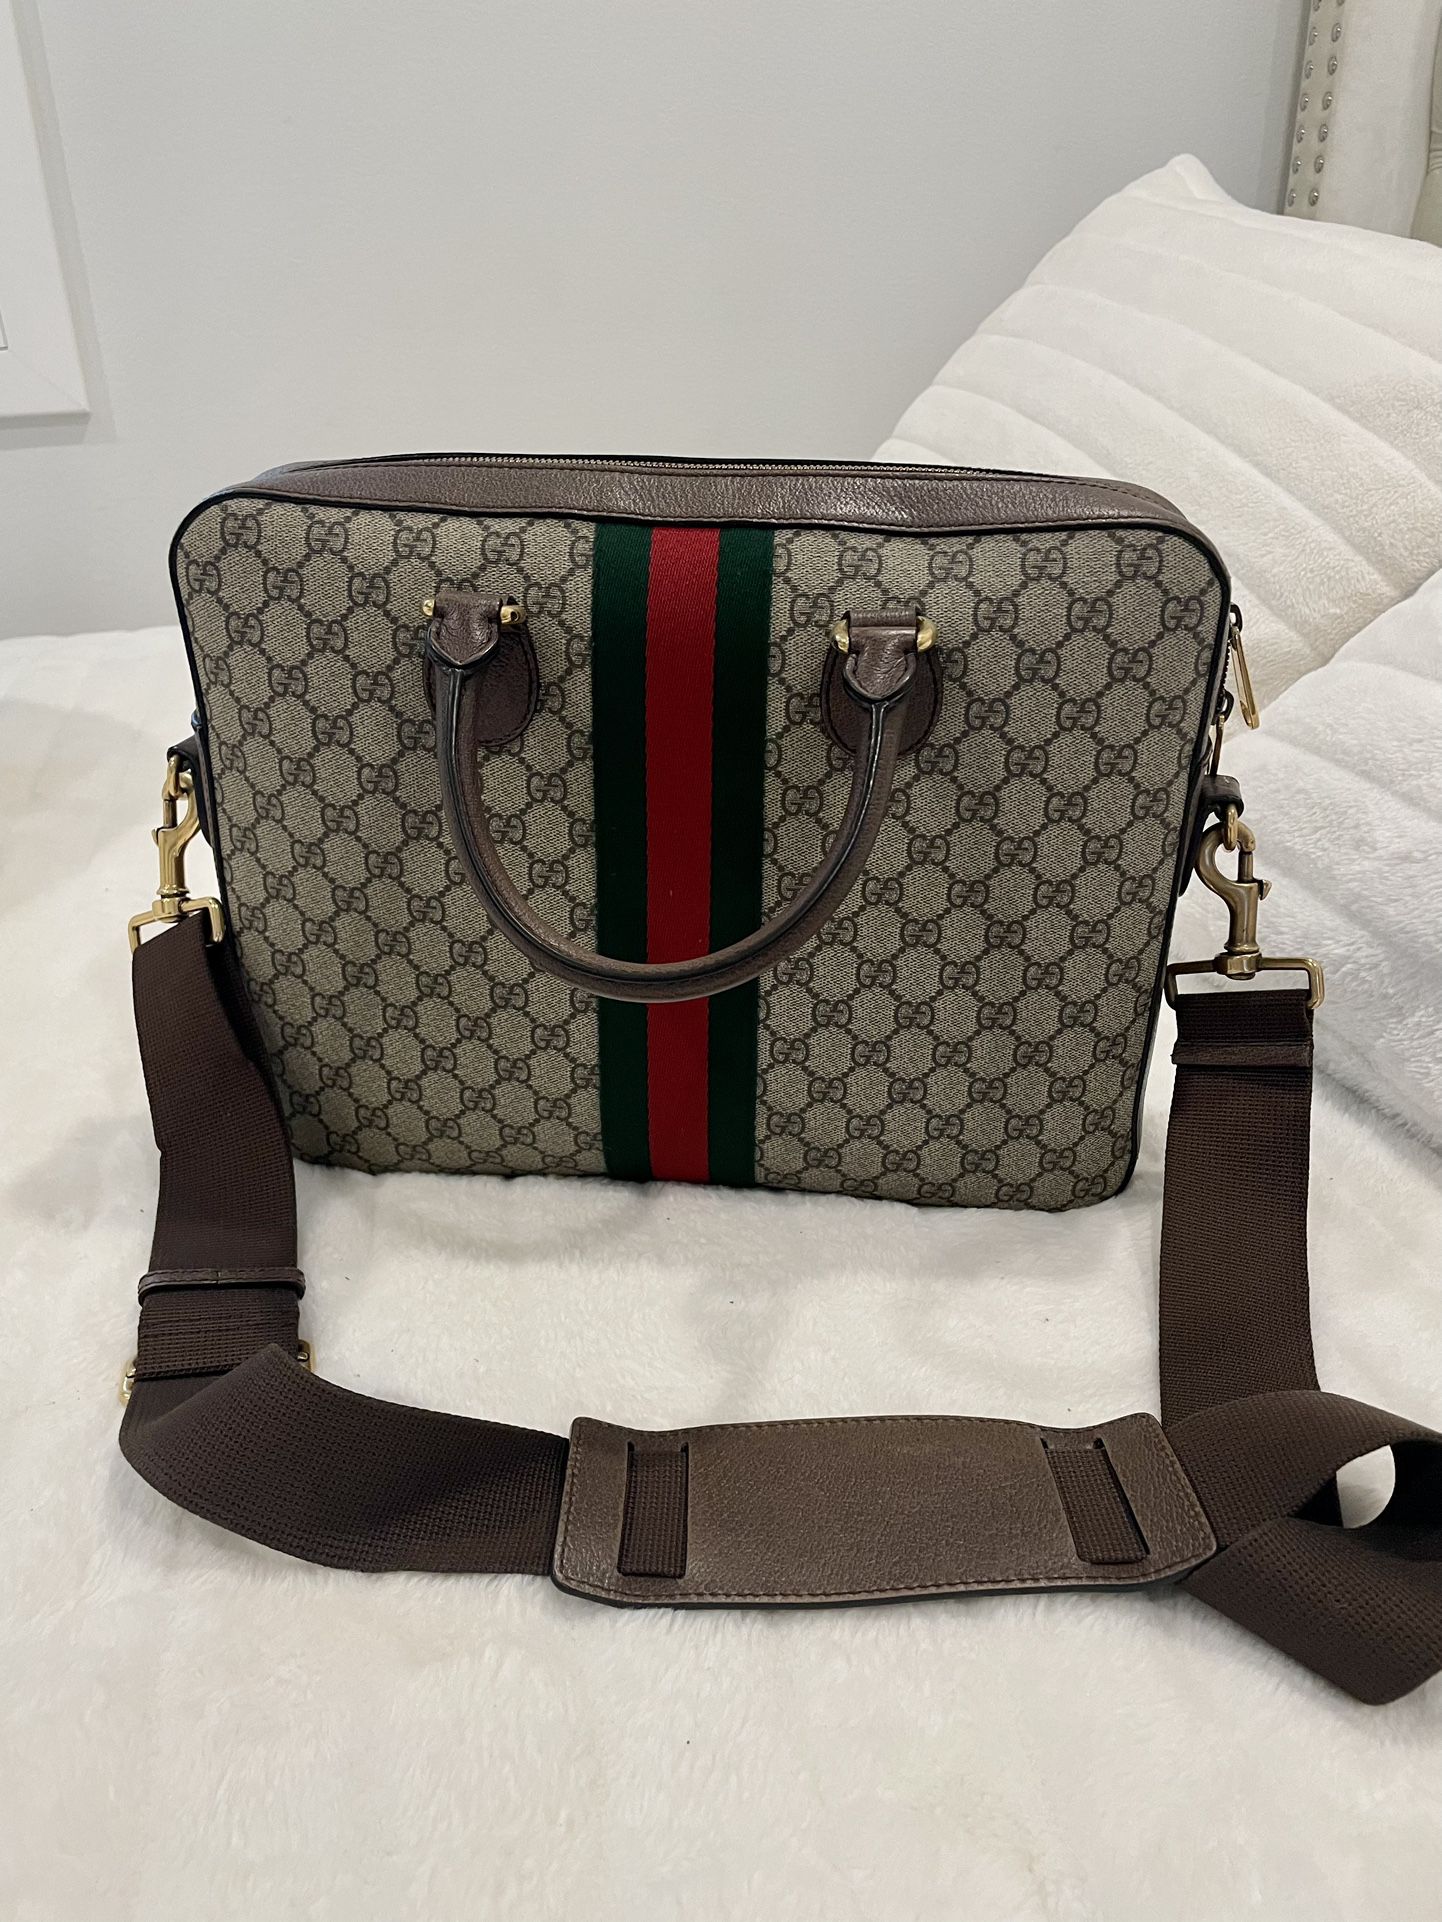 LOUIS VUITTON Damier Graphite Computer Sleeve PM PC Laptop Cover for Sale  in West Los Angeles, CA - OfferUp